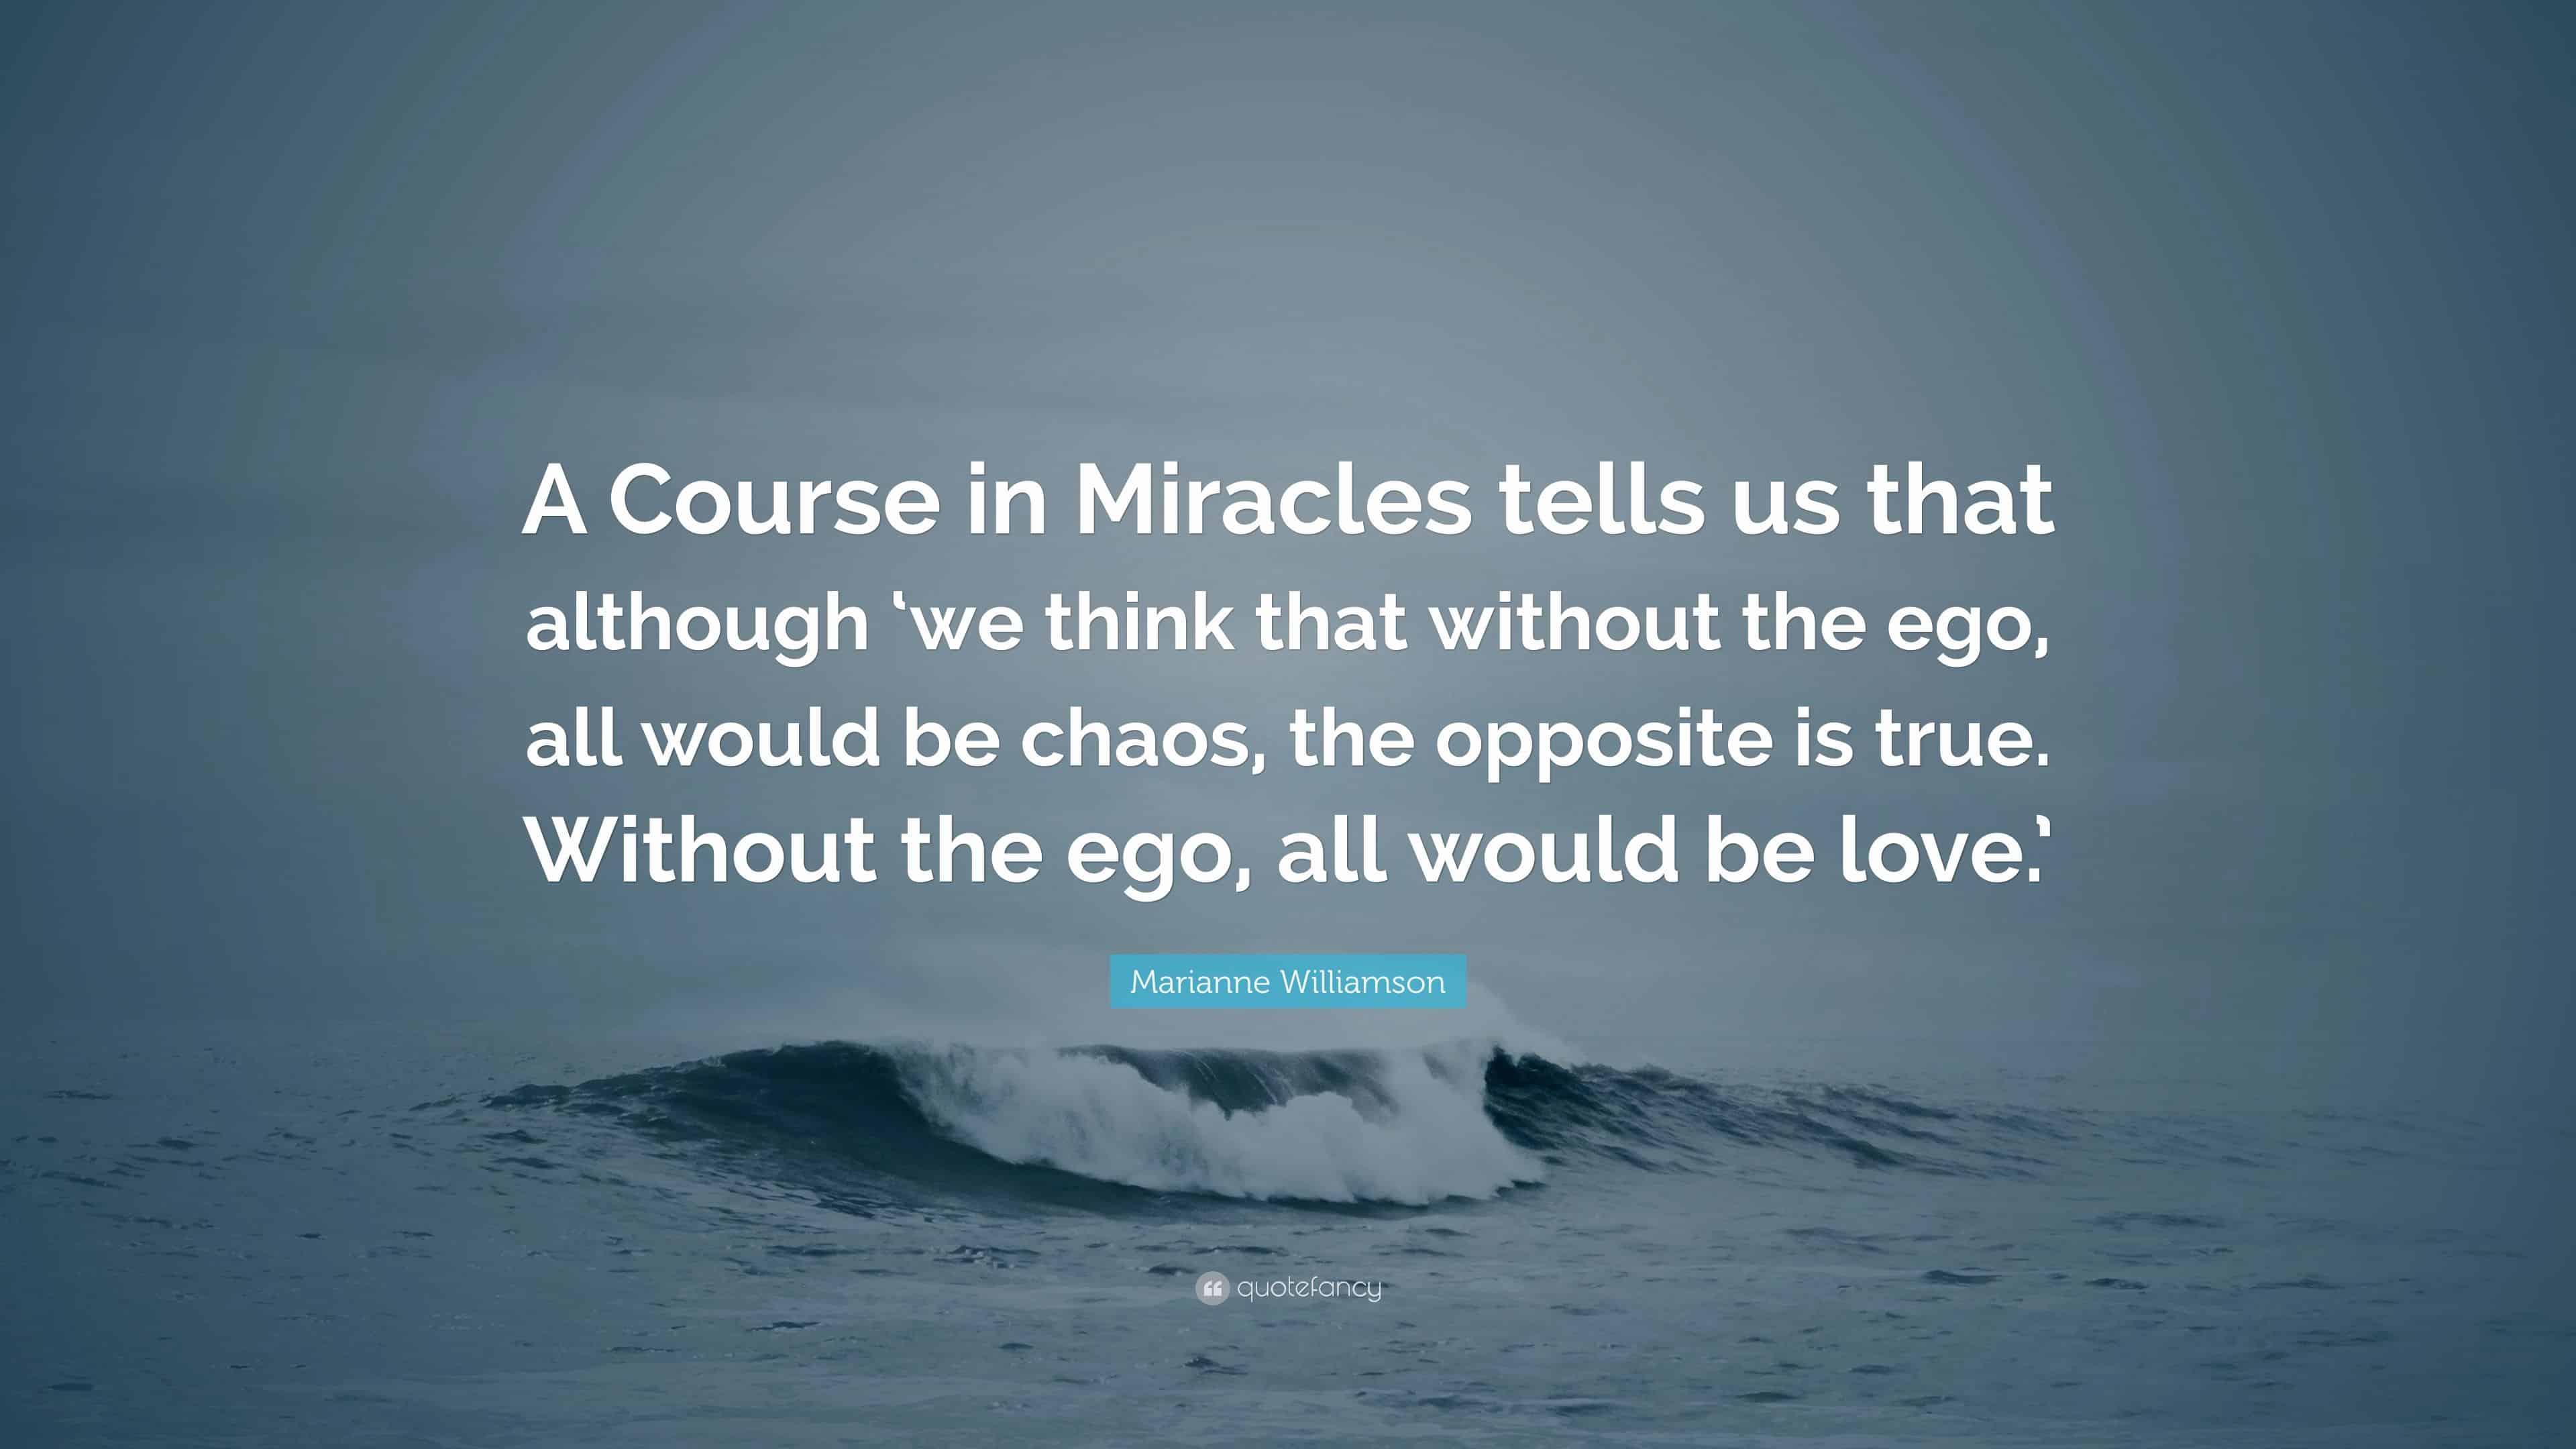 a course in miracles quotes Agreeable Marianne Williamson Quote ?A Course i...